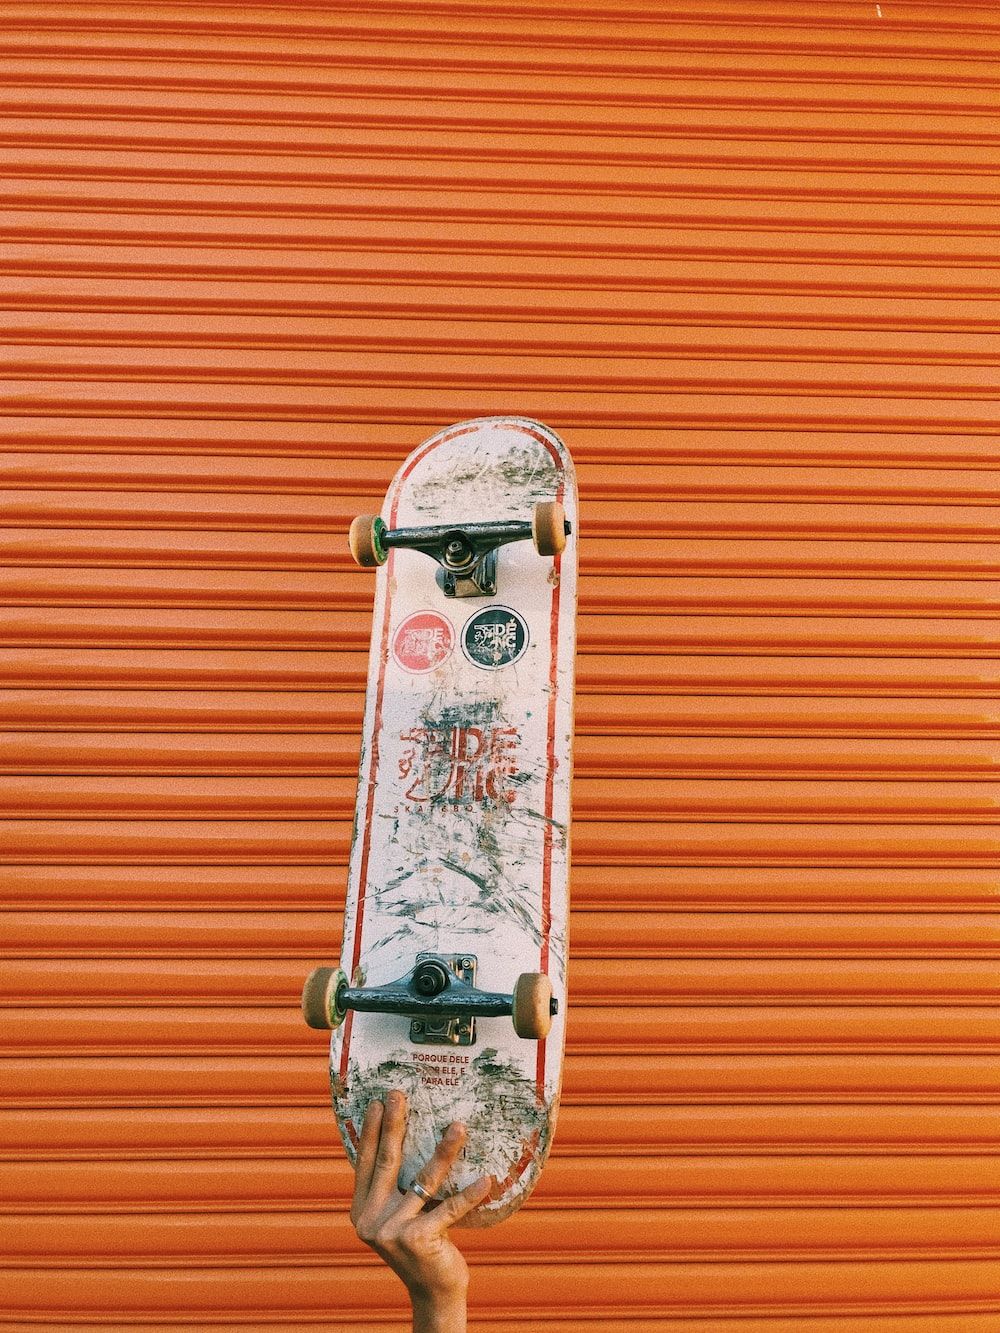 Person holding skateboard in front of the orange wall - Skate